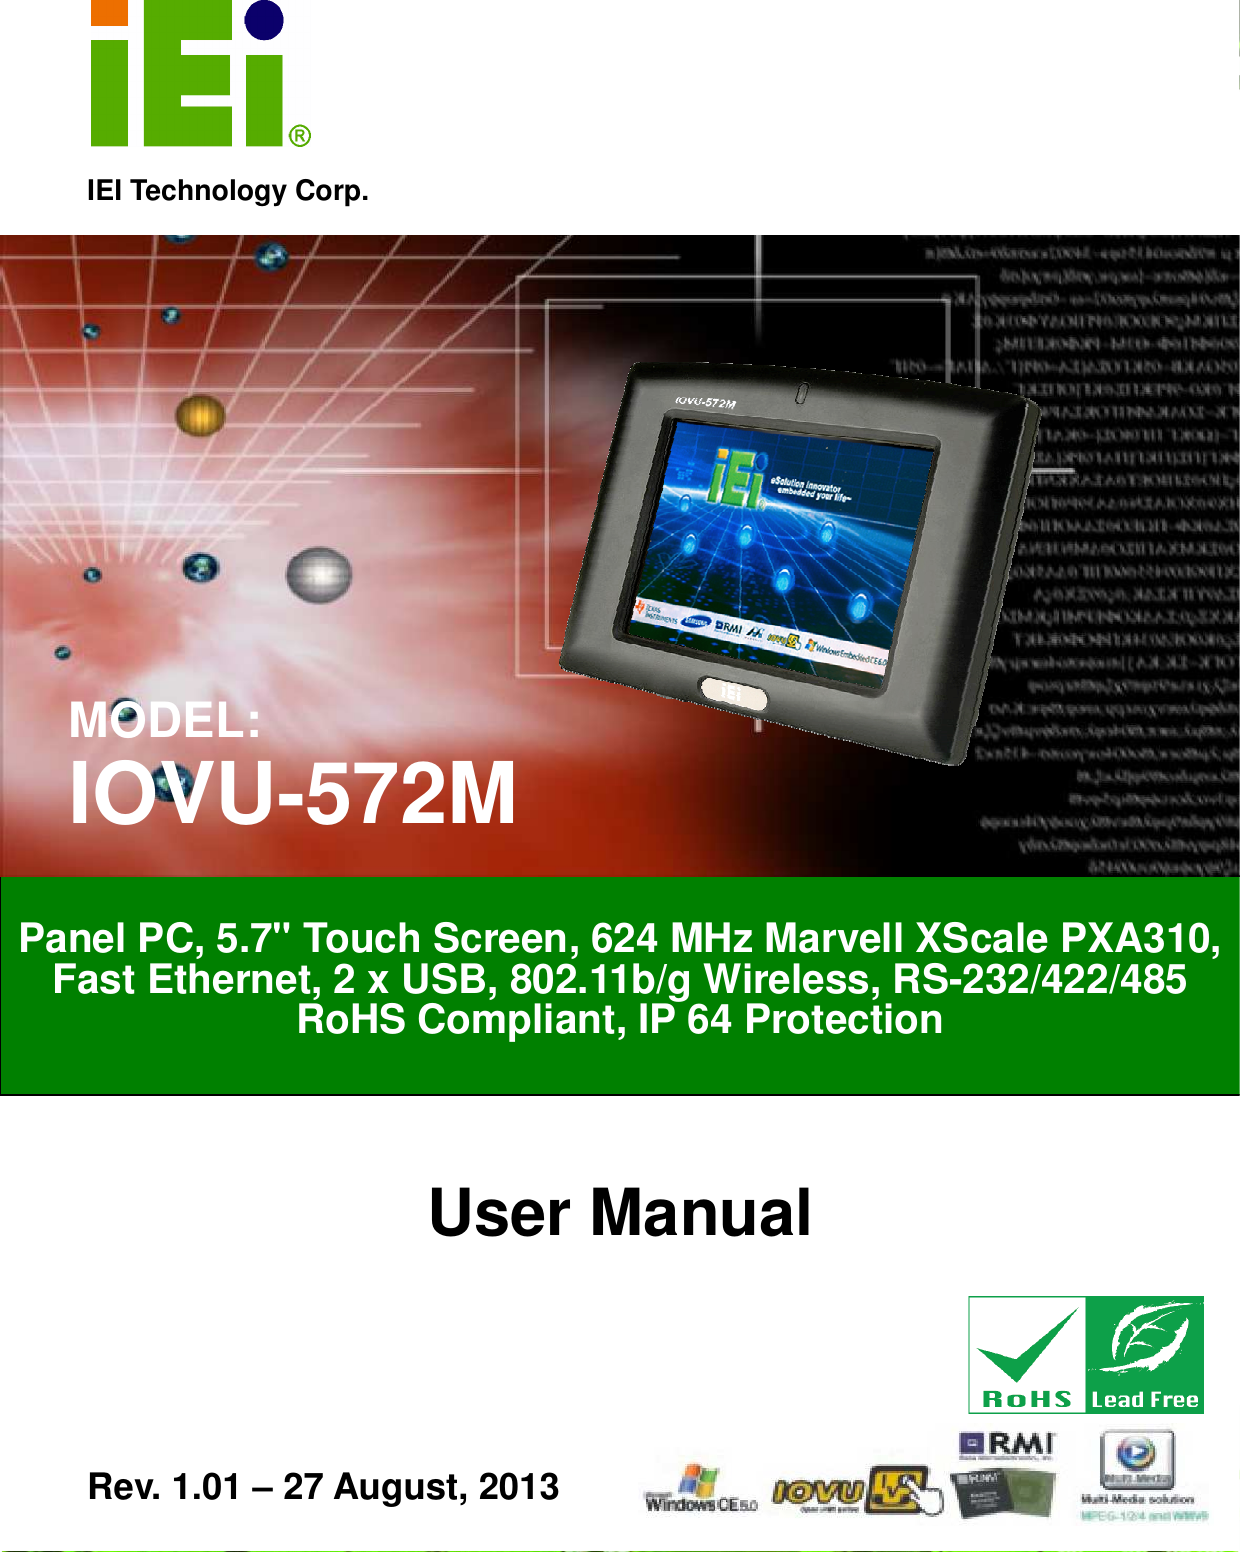   IOVU-572M Panel PC Page i IEI Technology Corp. User Manual  MODEL: IOVU-572M Panel PC, 5.7&quot; Touch Screen, 624 MHz Marvell XScale PXA310, Fast Ethernet, 2 x USB, 802.11b/g Wireless, RS-232/422/485 RoHS Compliant, IP 64 Protection Rev. 1.01 – 27 August, 2013 